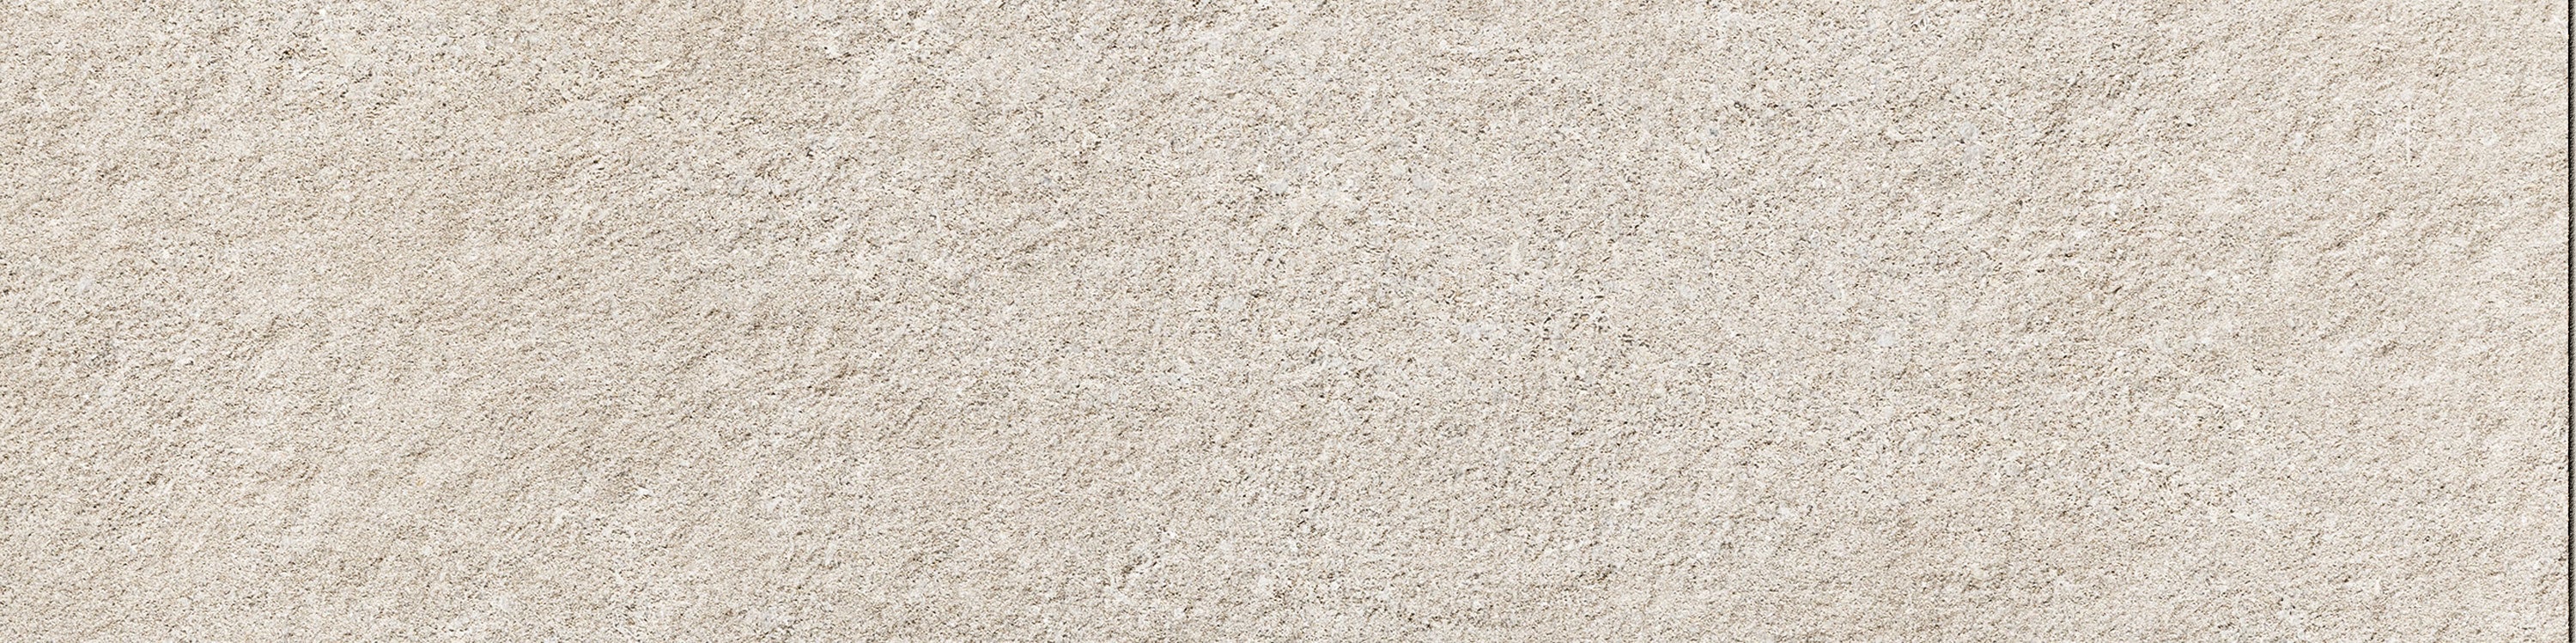 landmark frontier20 limestone indiana buff select paver tile 12x24x20mm matte rectified porcelain tile distributed by surface group international